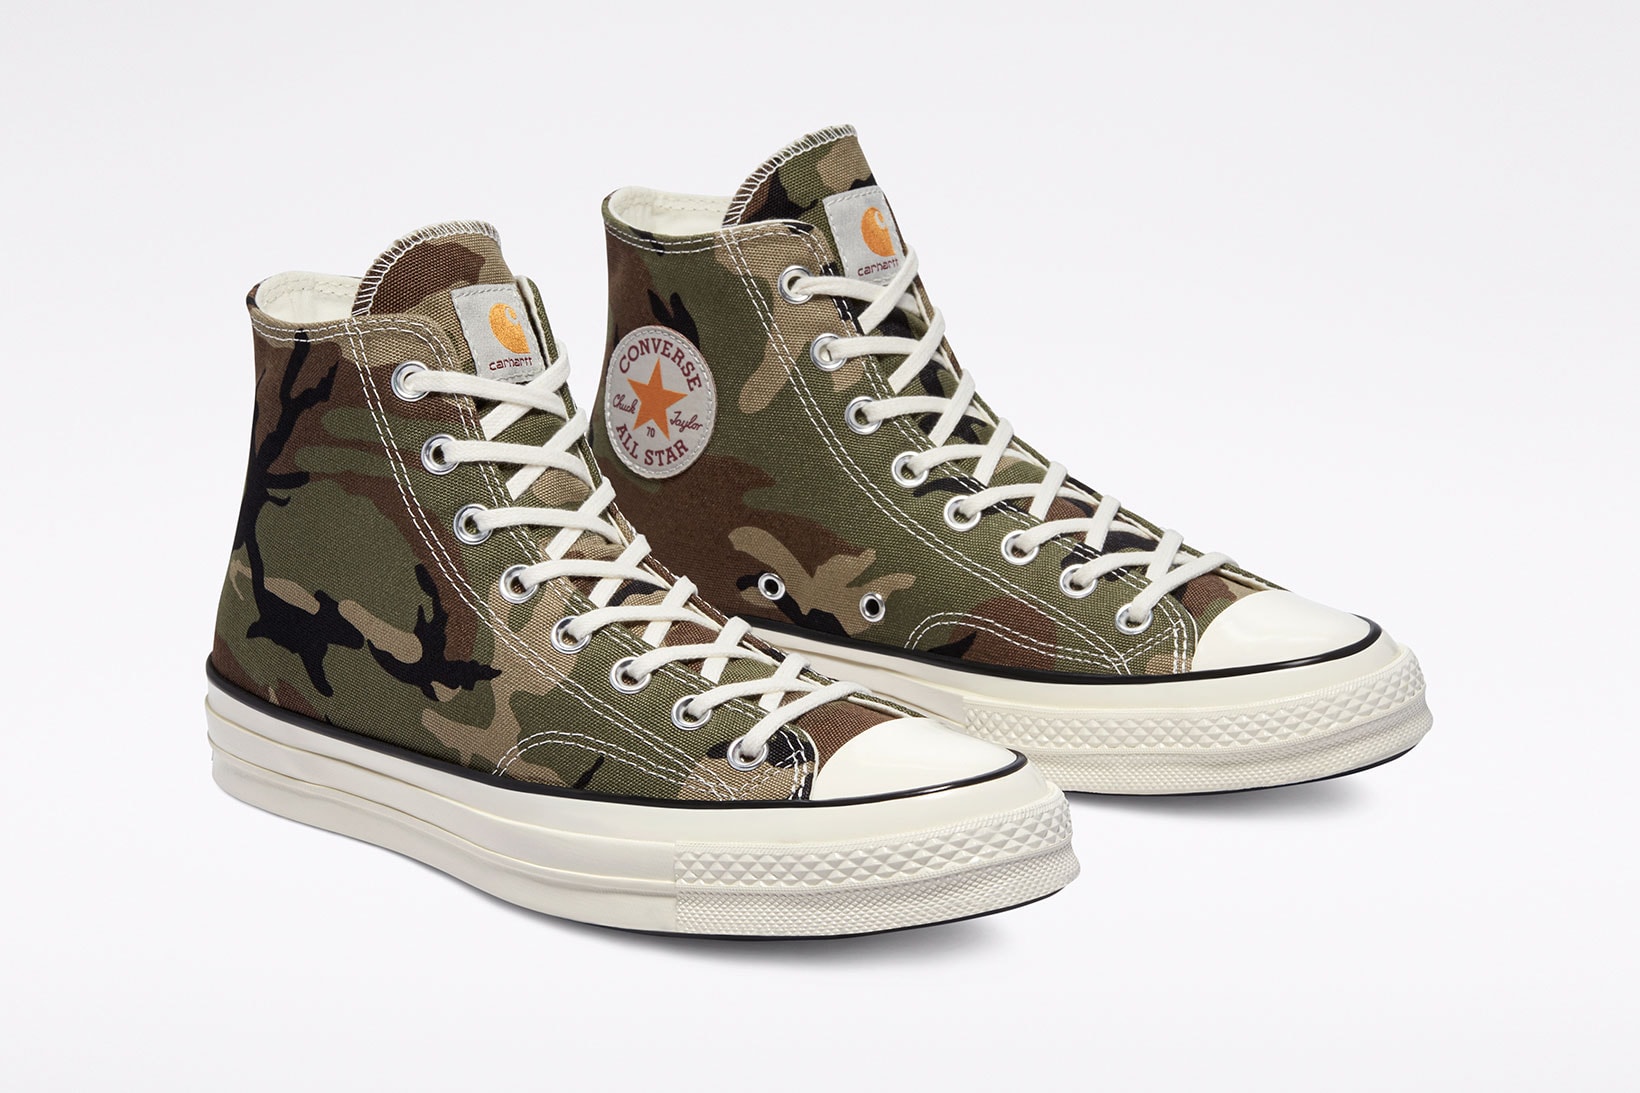 carhartt wip converse chuck 70 icons collaboration sneakers camouflage pattern details logo